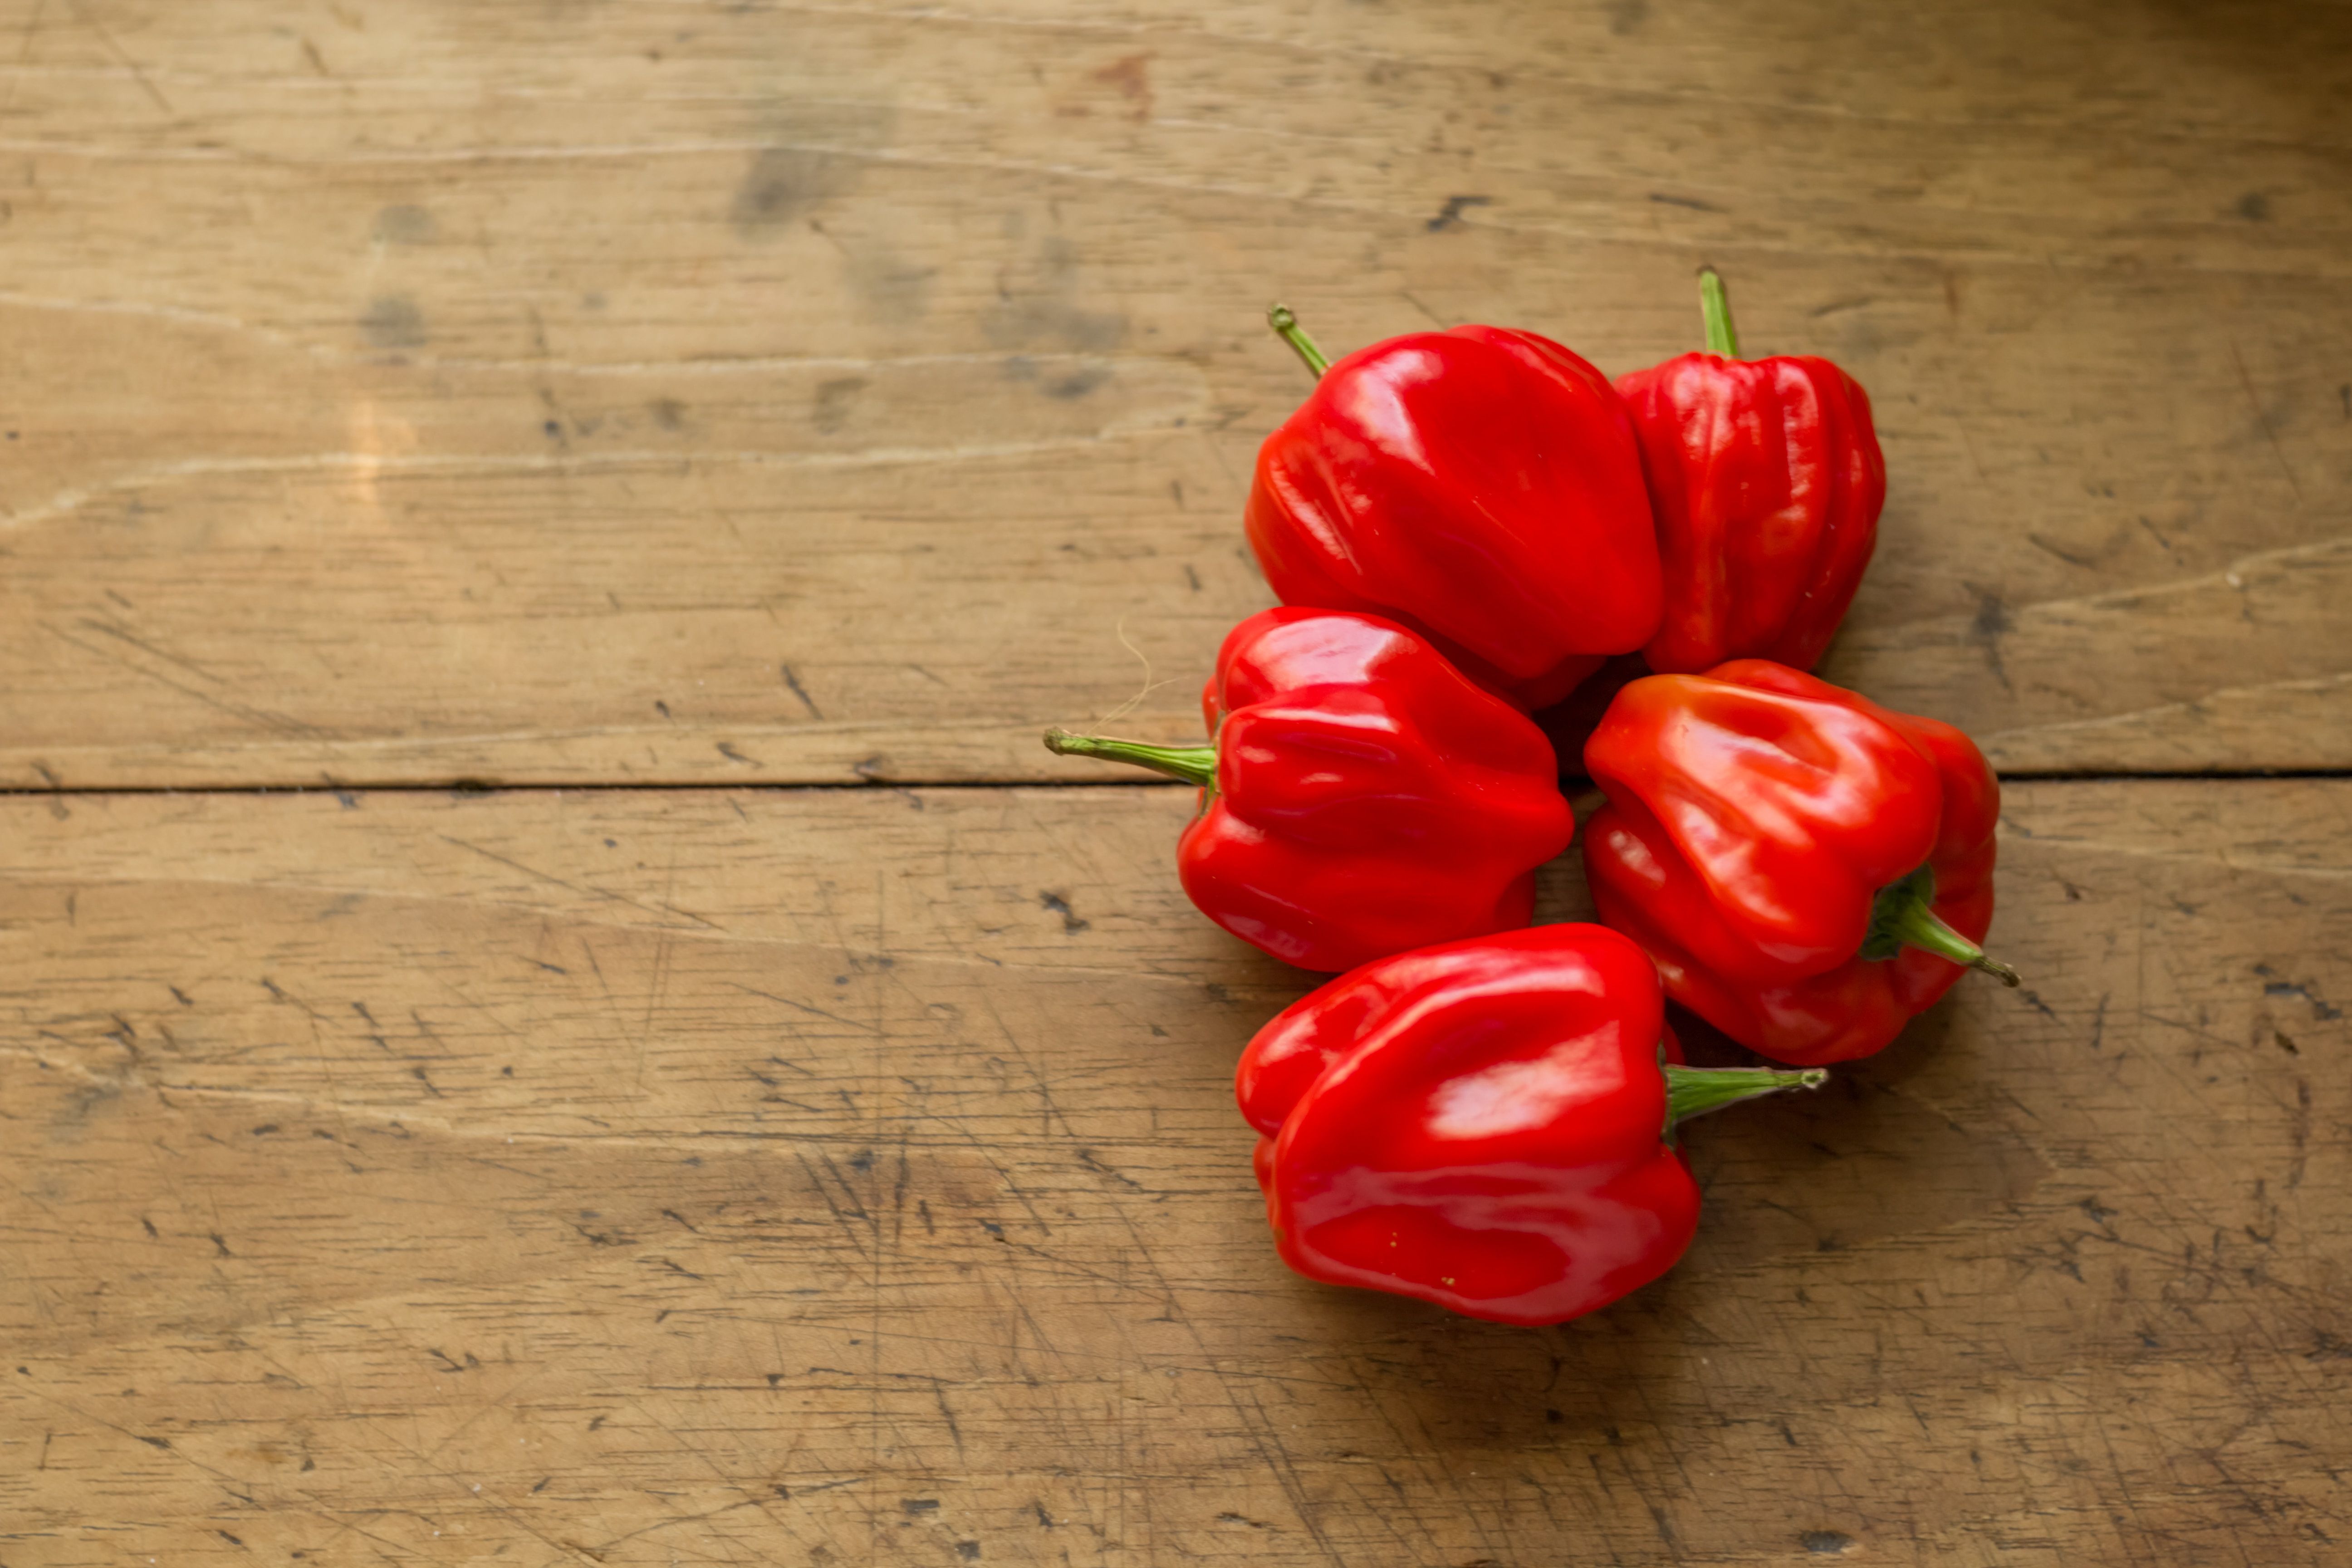 Five red peppers on a wooden surface